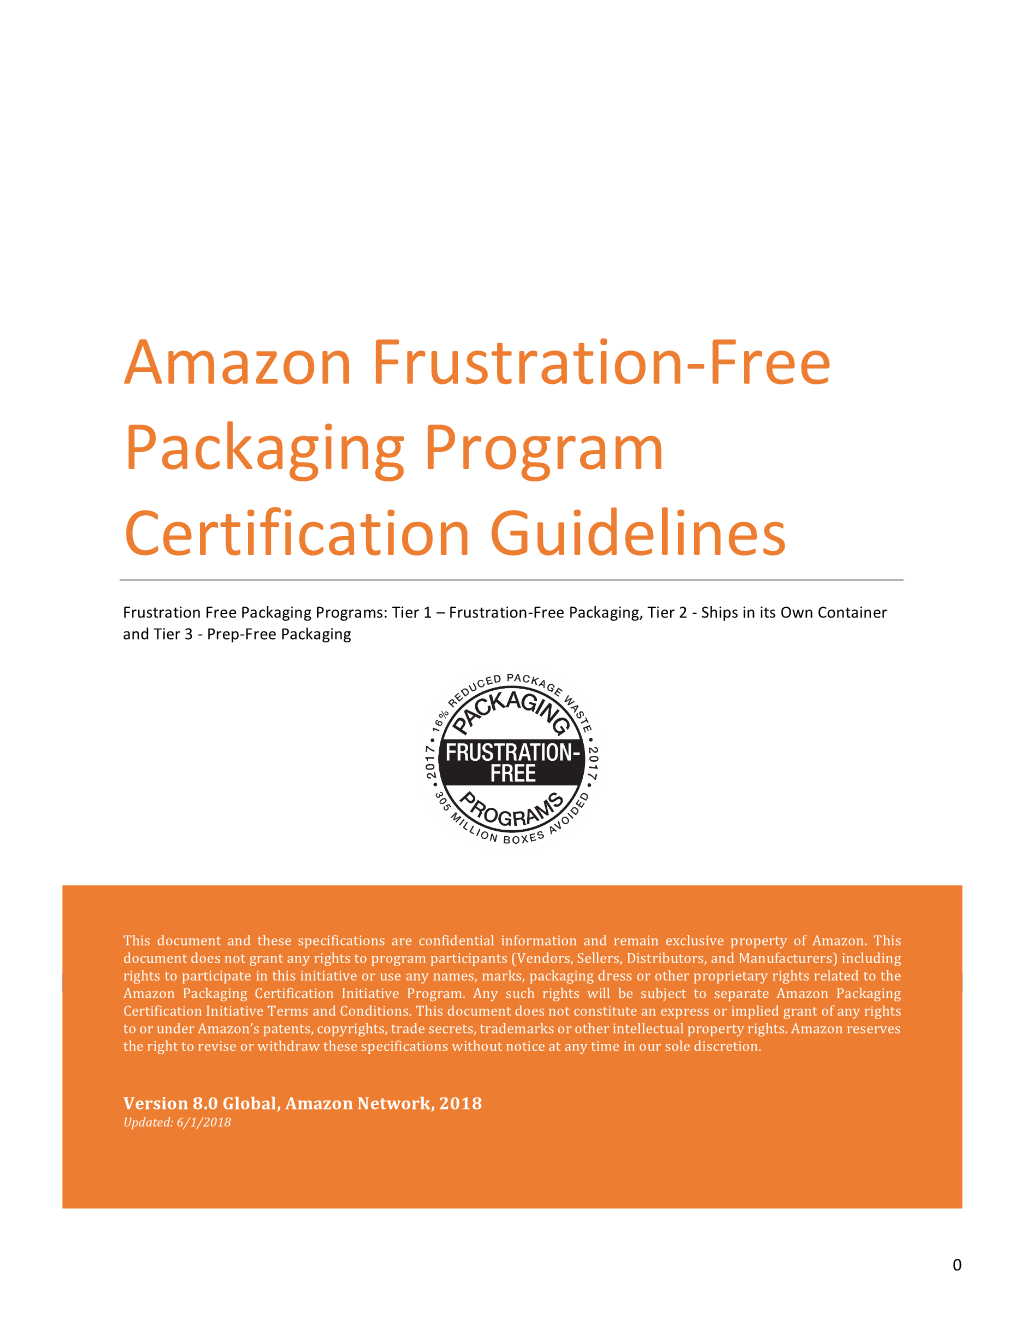 Amazon Frustration-‐Free Packaging Program Certification Guidelines